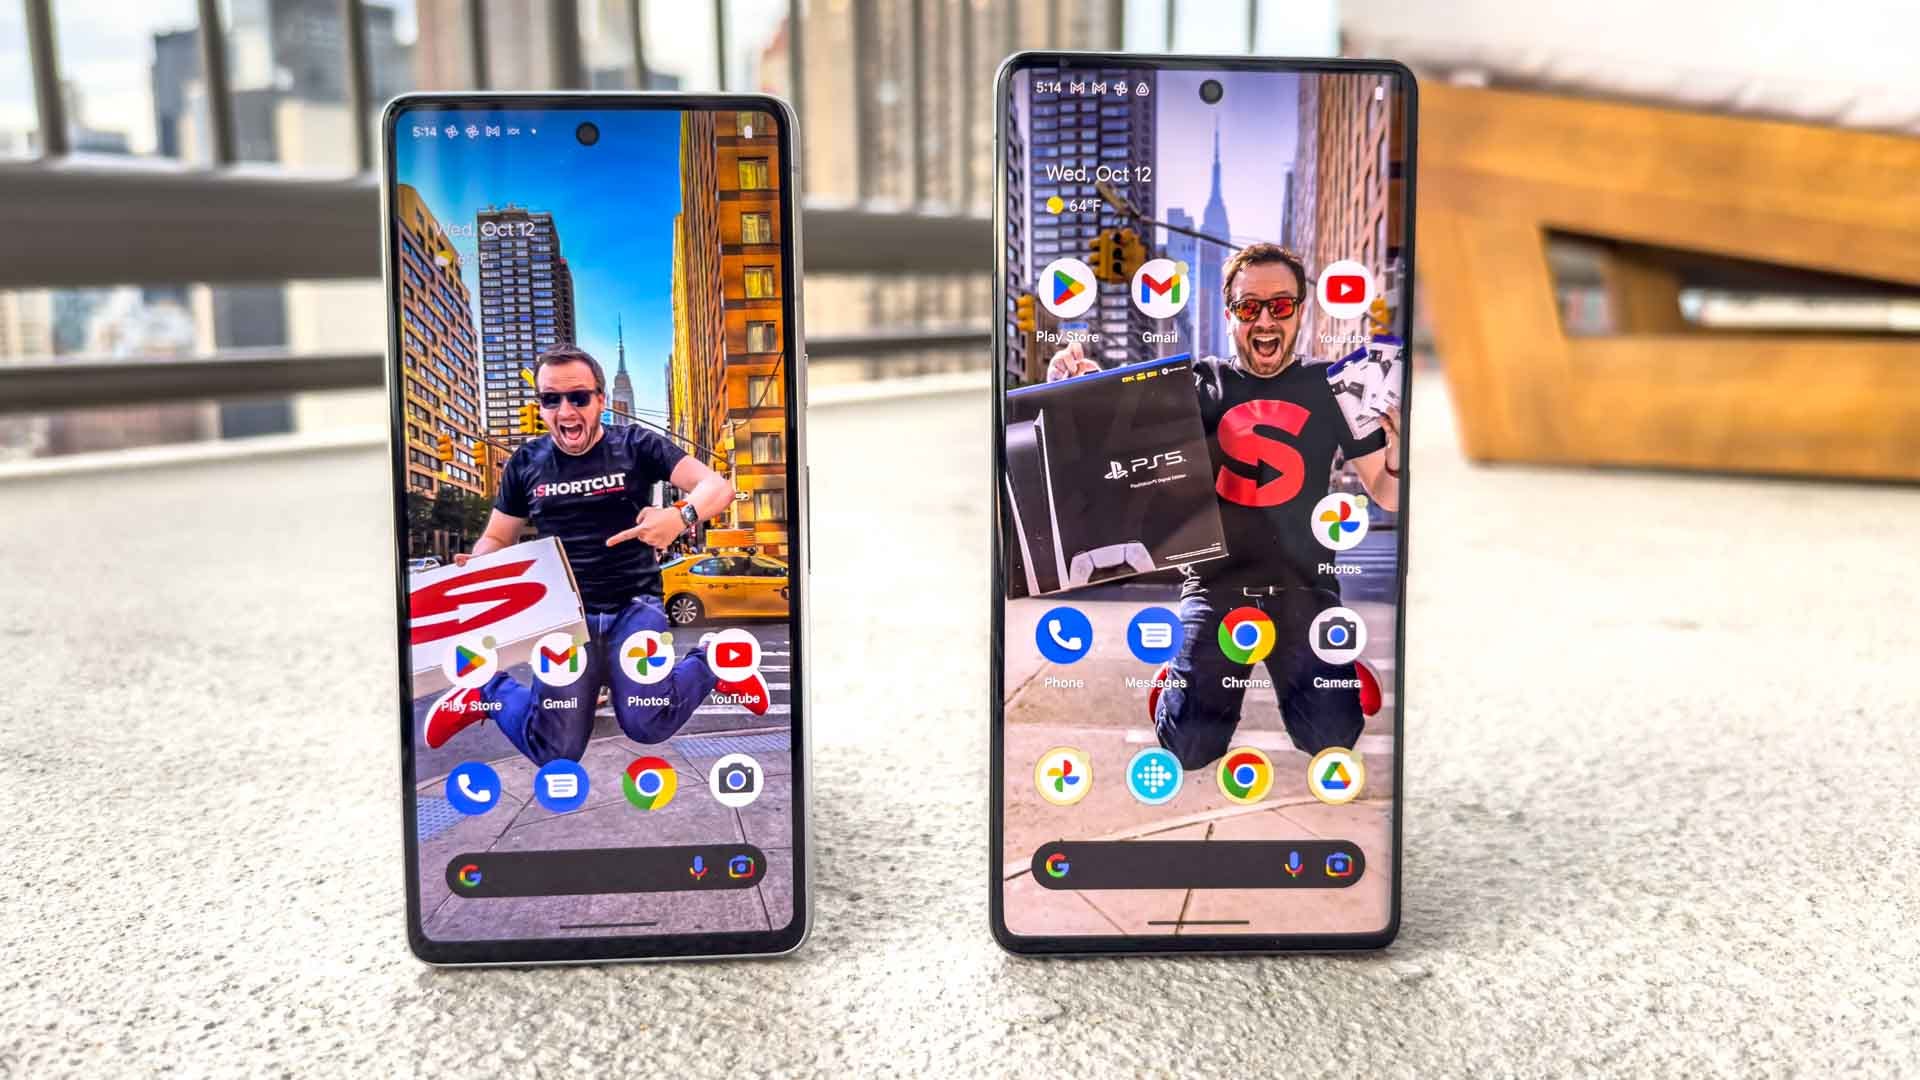 Google Pixel 7 Hands-On: $599 Flagship Brings New Photo-Editing